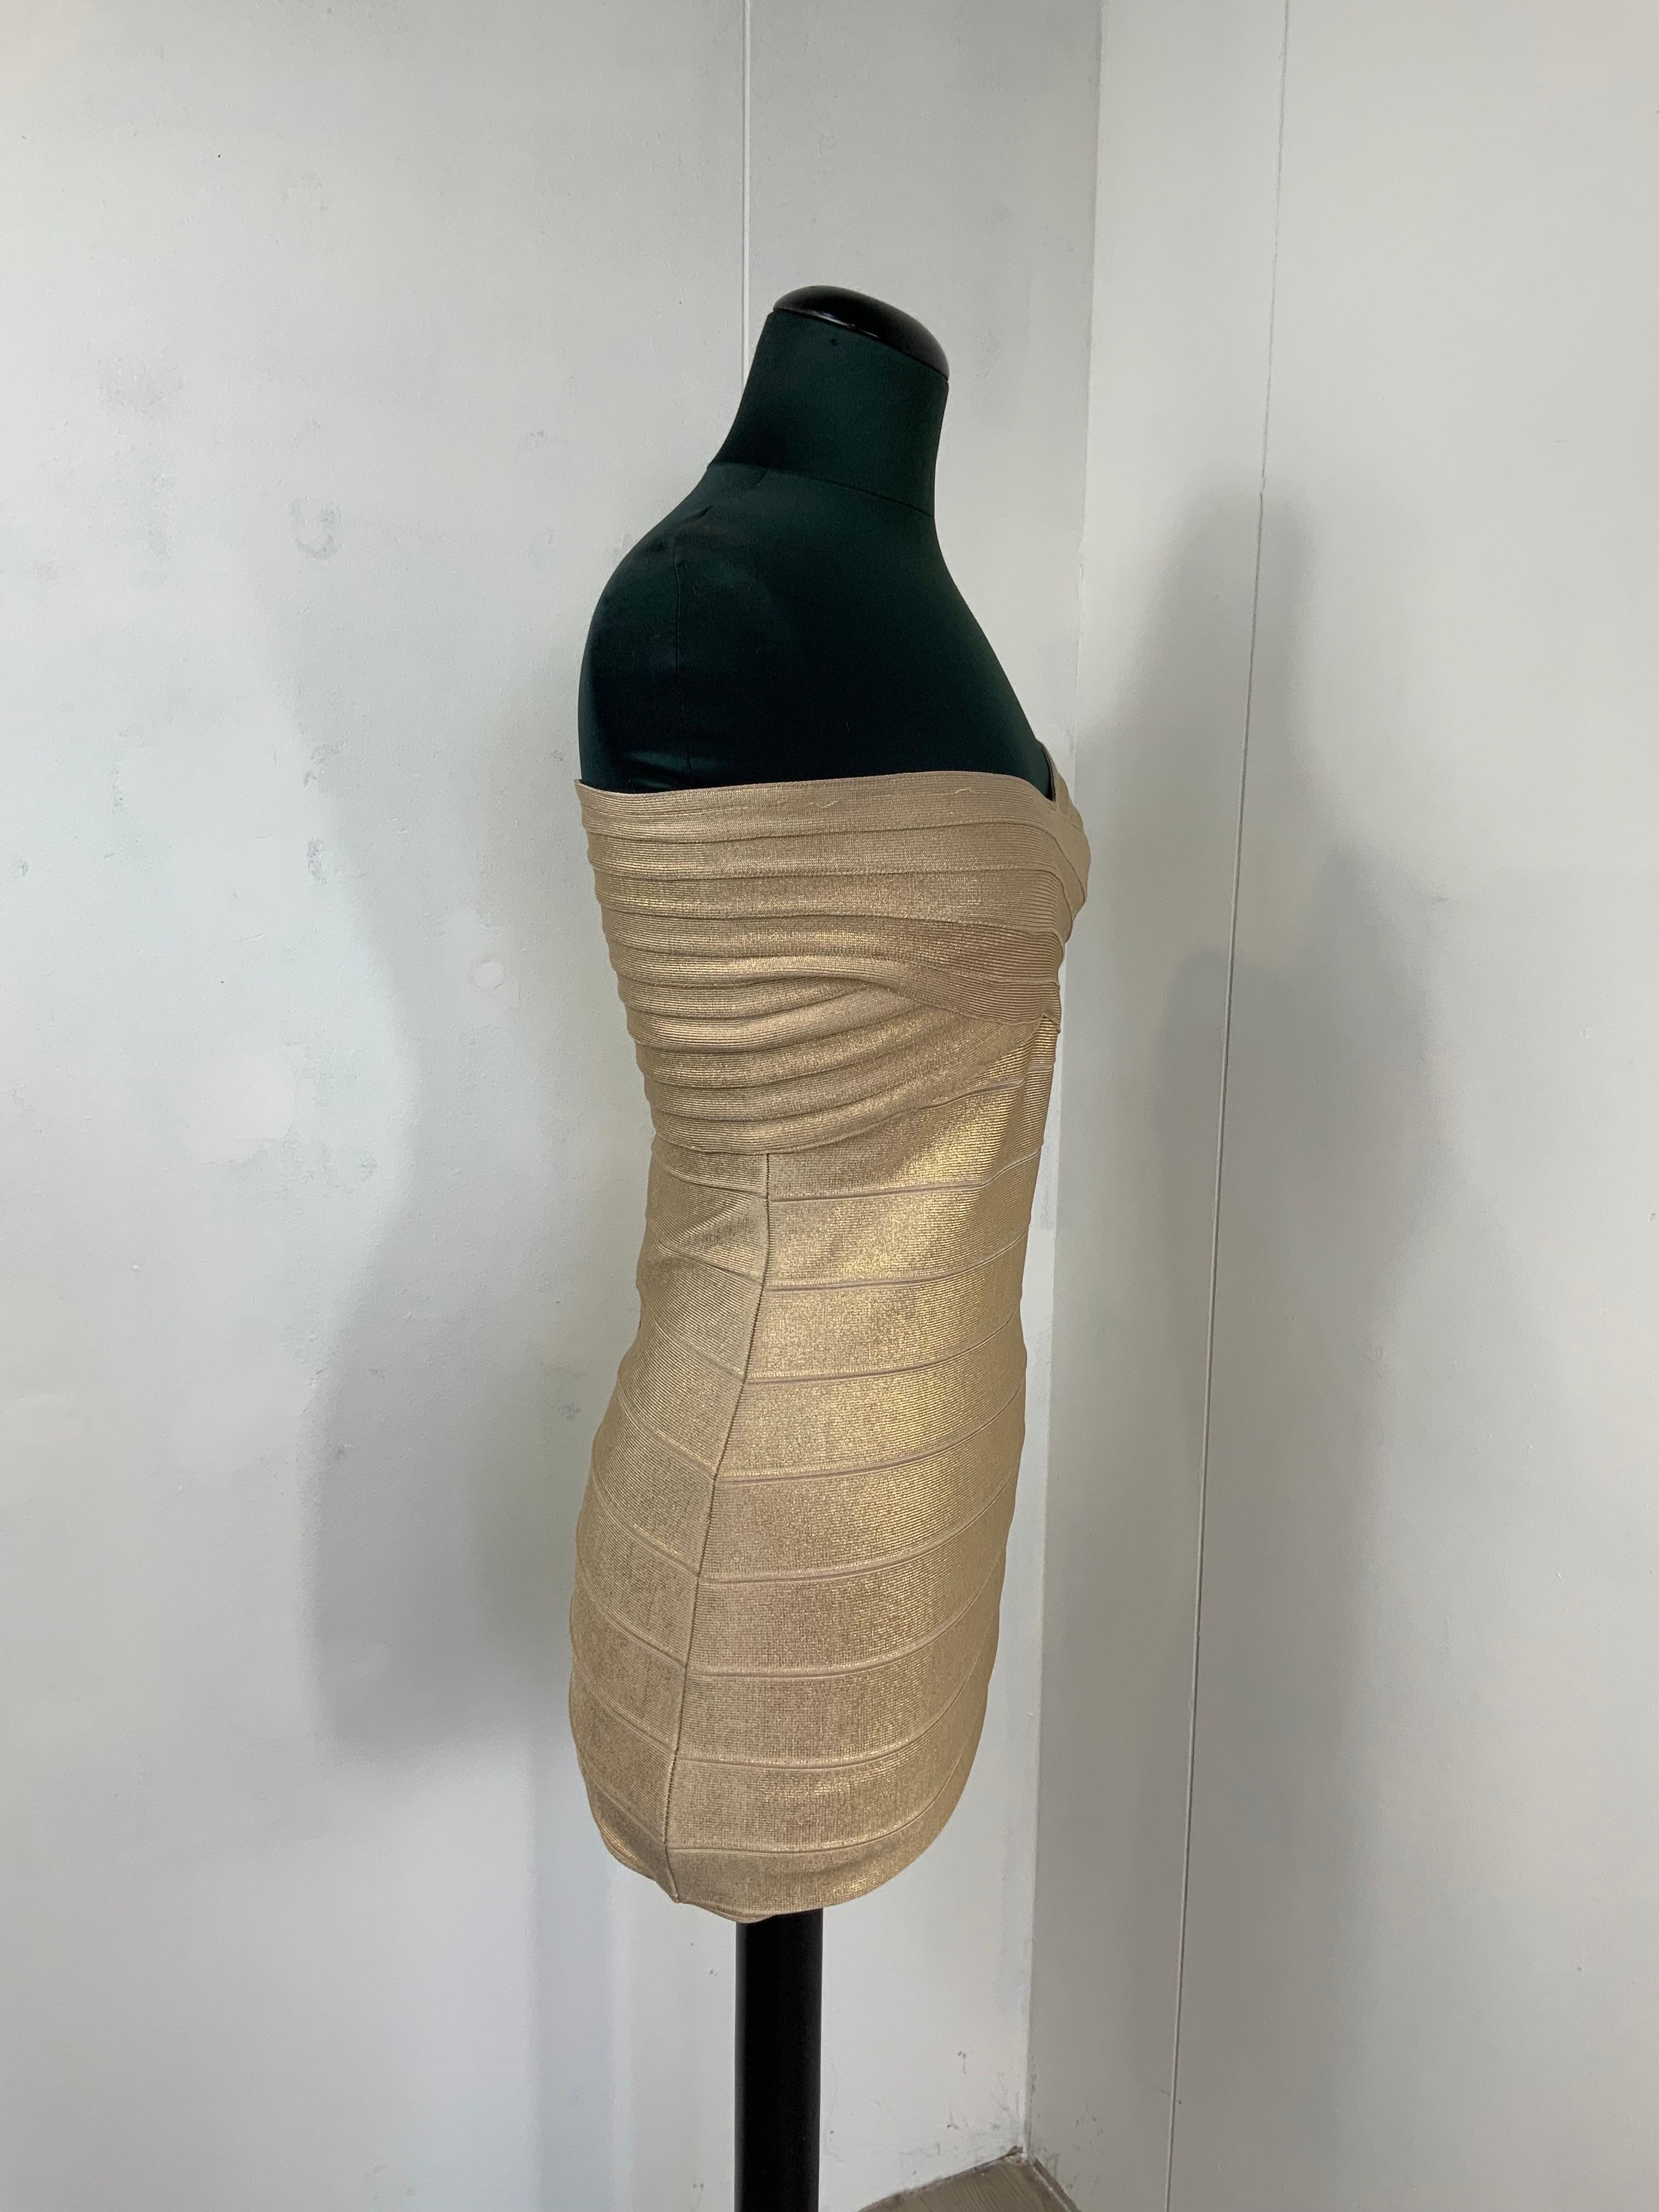 Herve Leger golden dress 
Composition tag is missing. Fabric is elastic.
Size L. But it fits tight.
Bust 36 cm
Waist 33 cm 
Length 64 cm
Conditions- very good. It shows some normal use signs and some pulled threads.